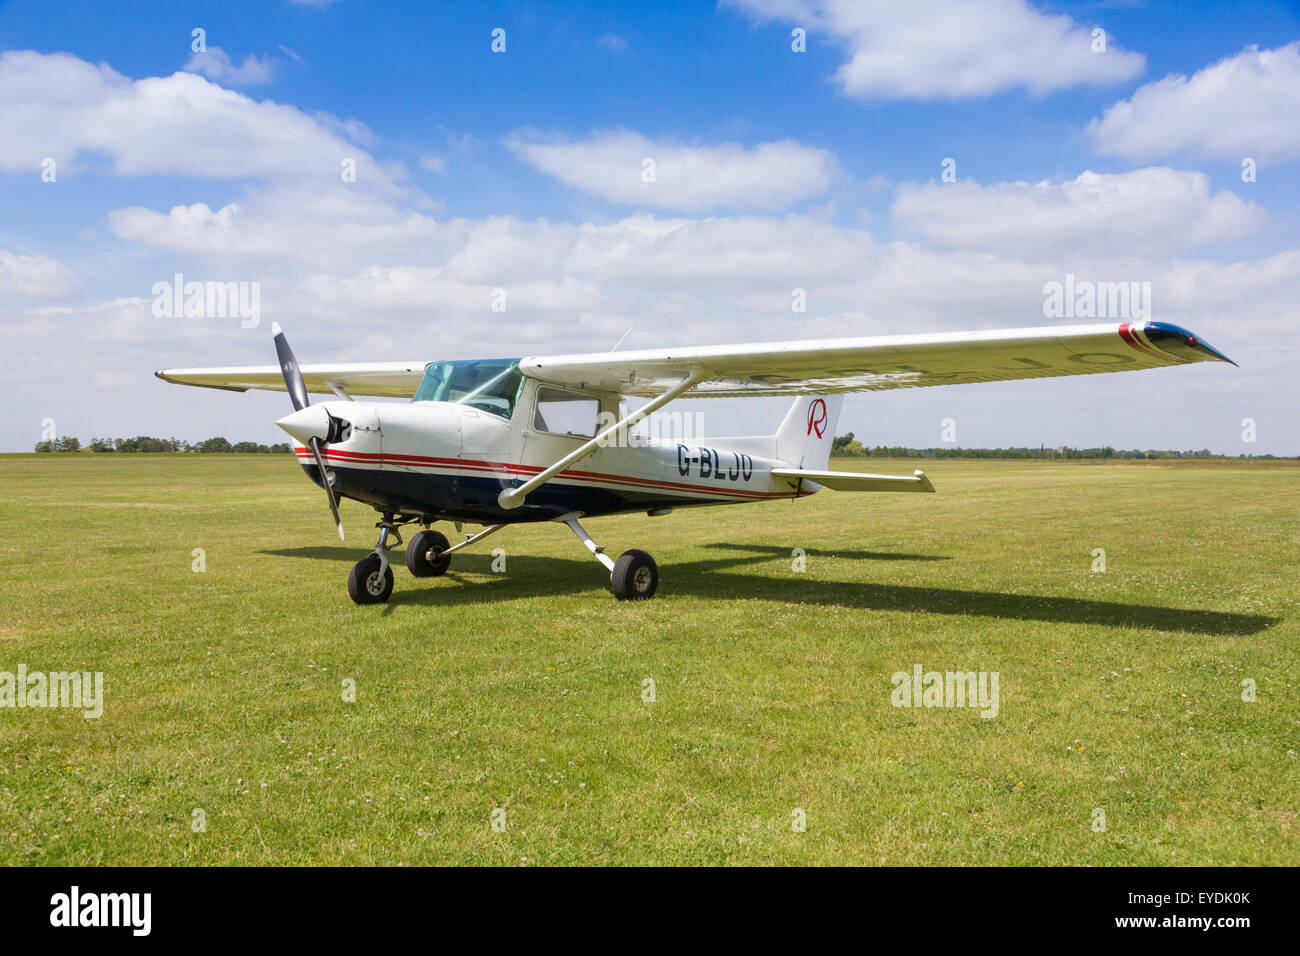 Cessna 152T aircraft at airfield in the UK Stock Photo